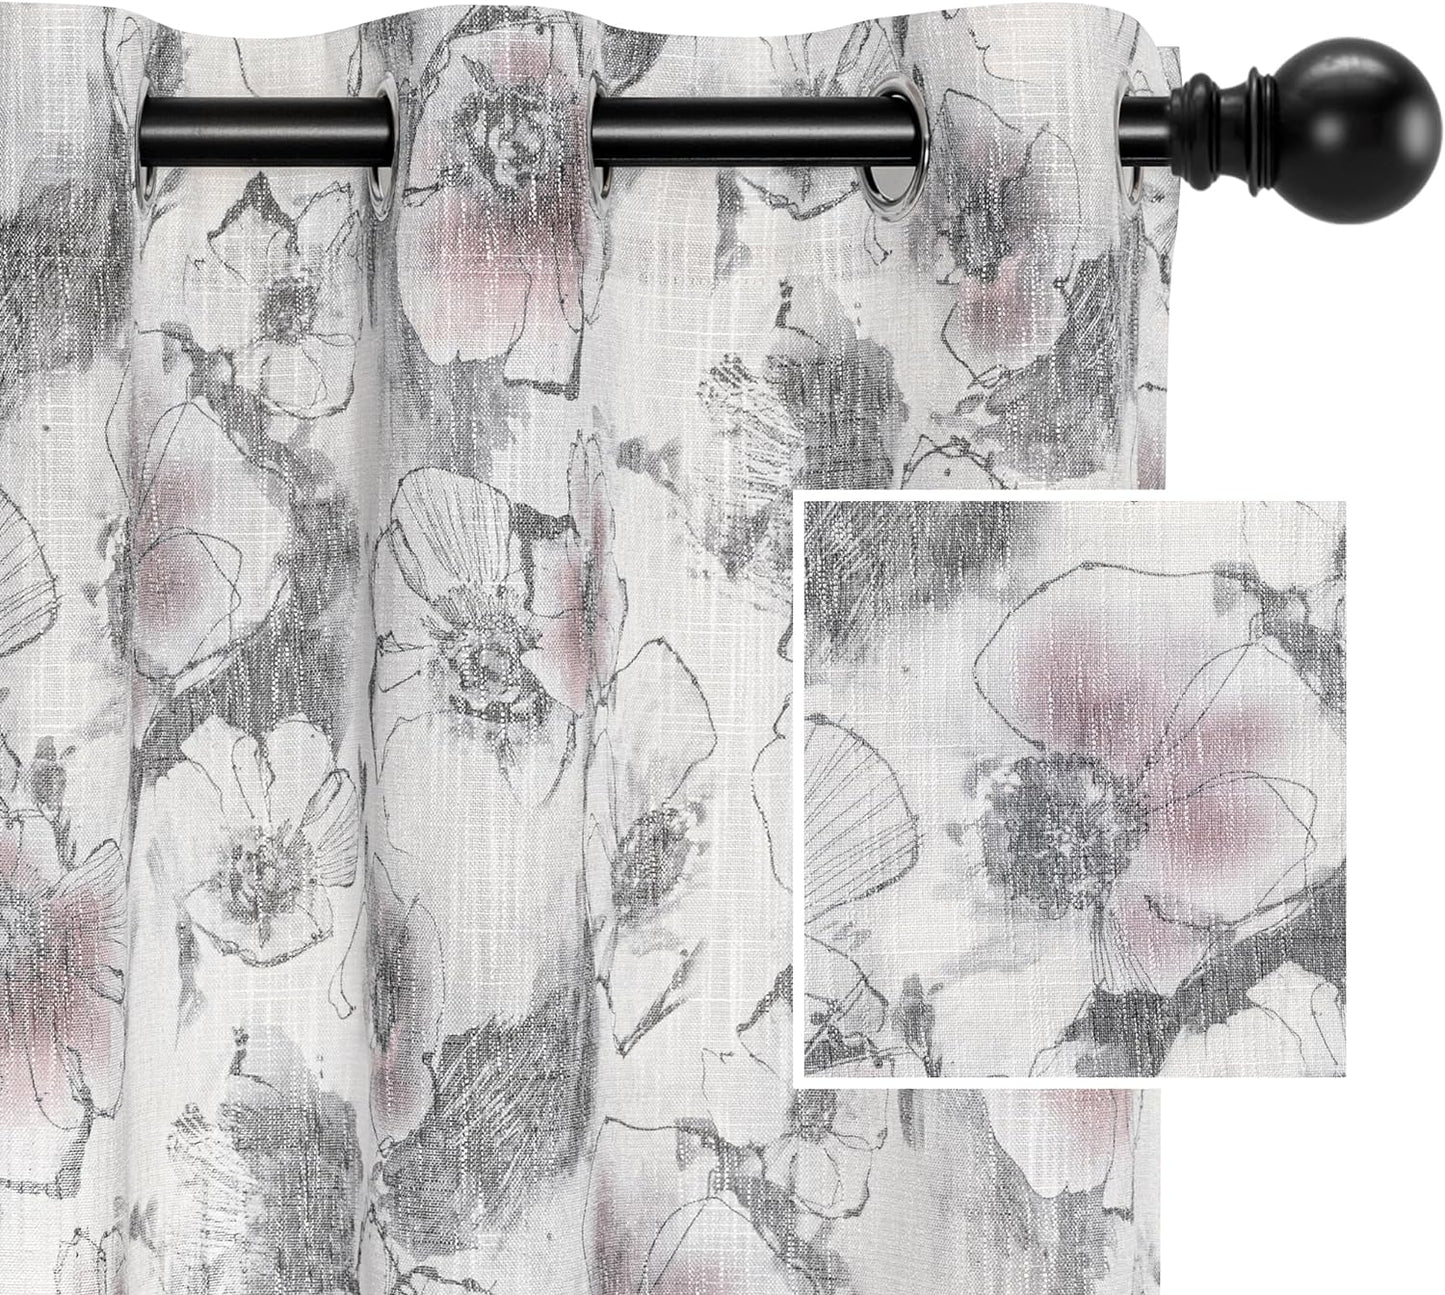 MYSKY HOME Floral Curtains 84 Inches Long Printed Grommet Cotton Curtains for Living Room Bedroom Light Filtering Linen Style Curtain Burlap Effect Drape Window Treatments, 2 Panel Coral and Natural  MYSKY HOME E-Pink/Grey 52"W X 95"L 